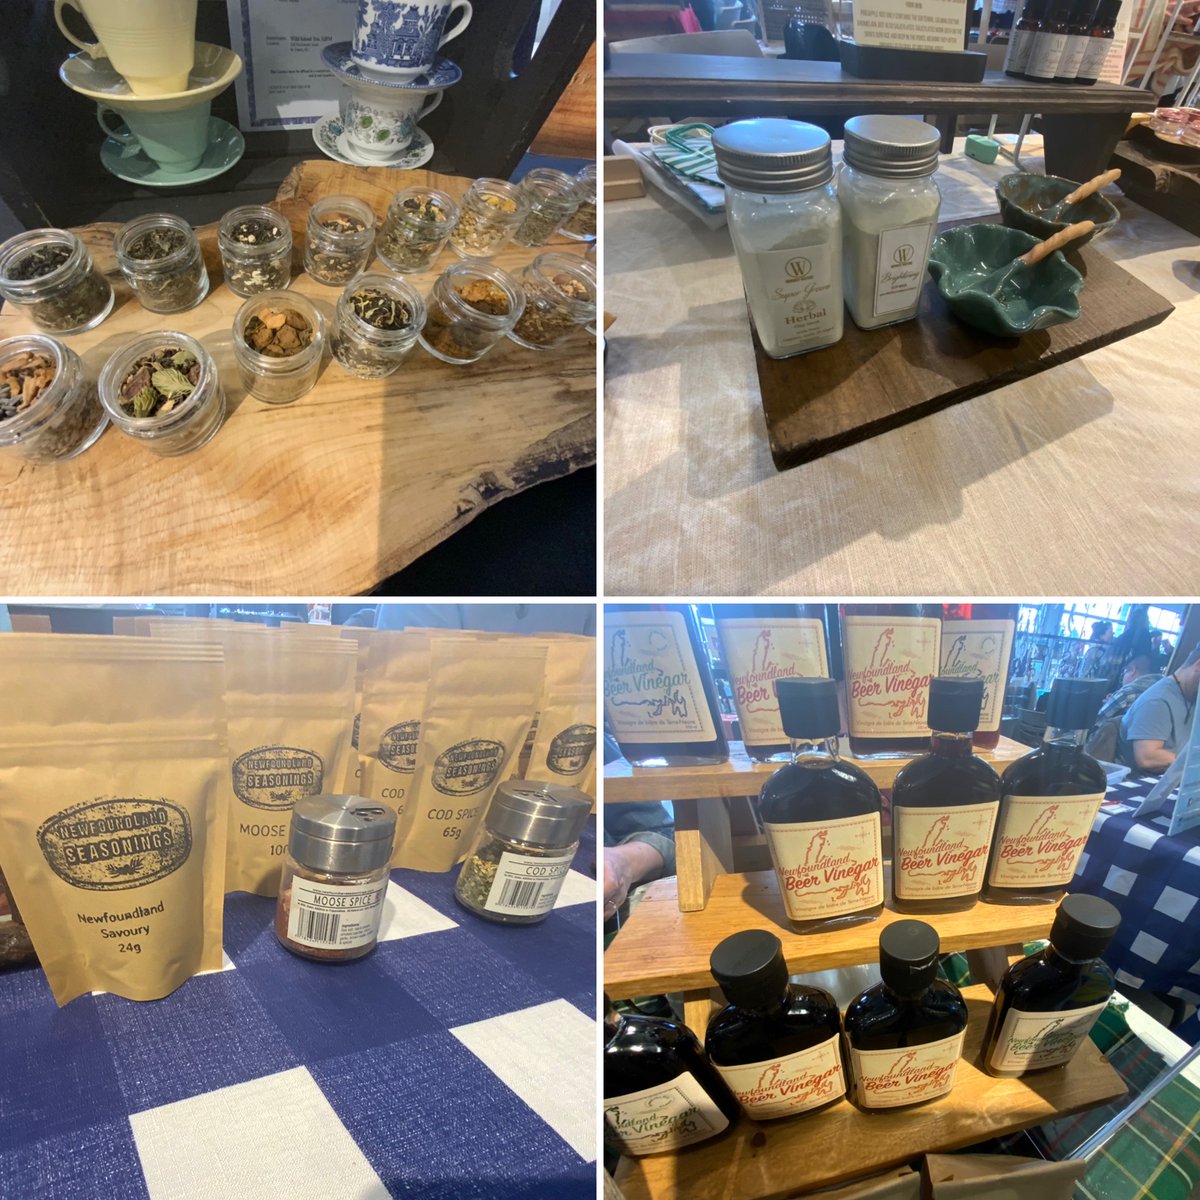 Come see all the home, bath and skincare products during the April 27th St. John’s Farmers’ Market until 4pm. #sjfmnl #sjfm #supportlocalbusinesses #stjohns #skincare #bathitems #homedecor